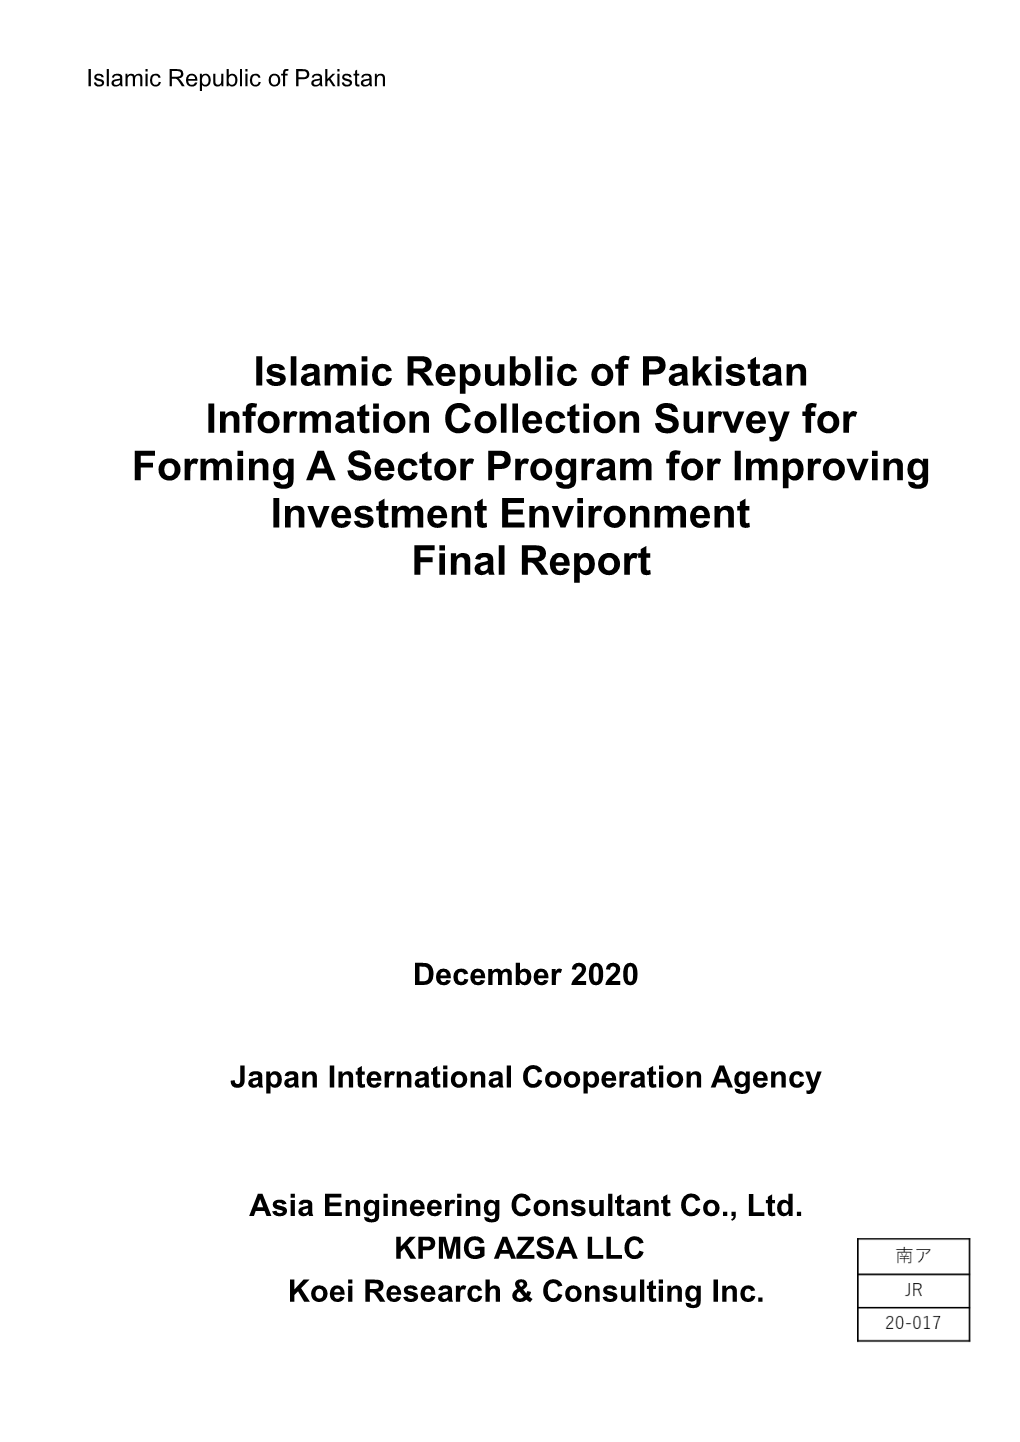 Islamic Republic of Pakistan Information Collection Survey for Forming a Sector Program for Improving Investment Environment Final Report